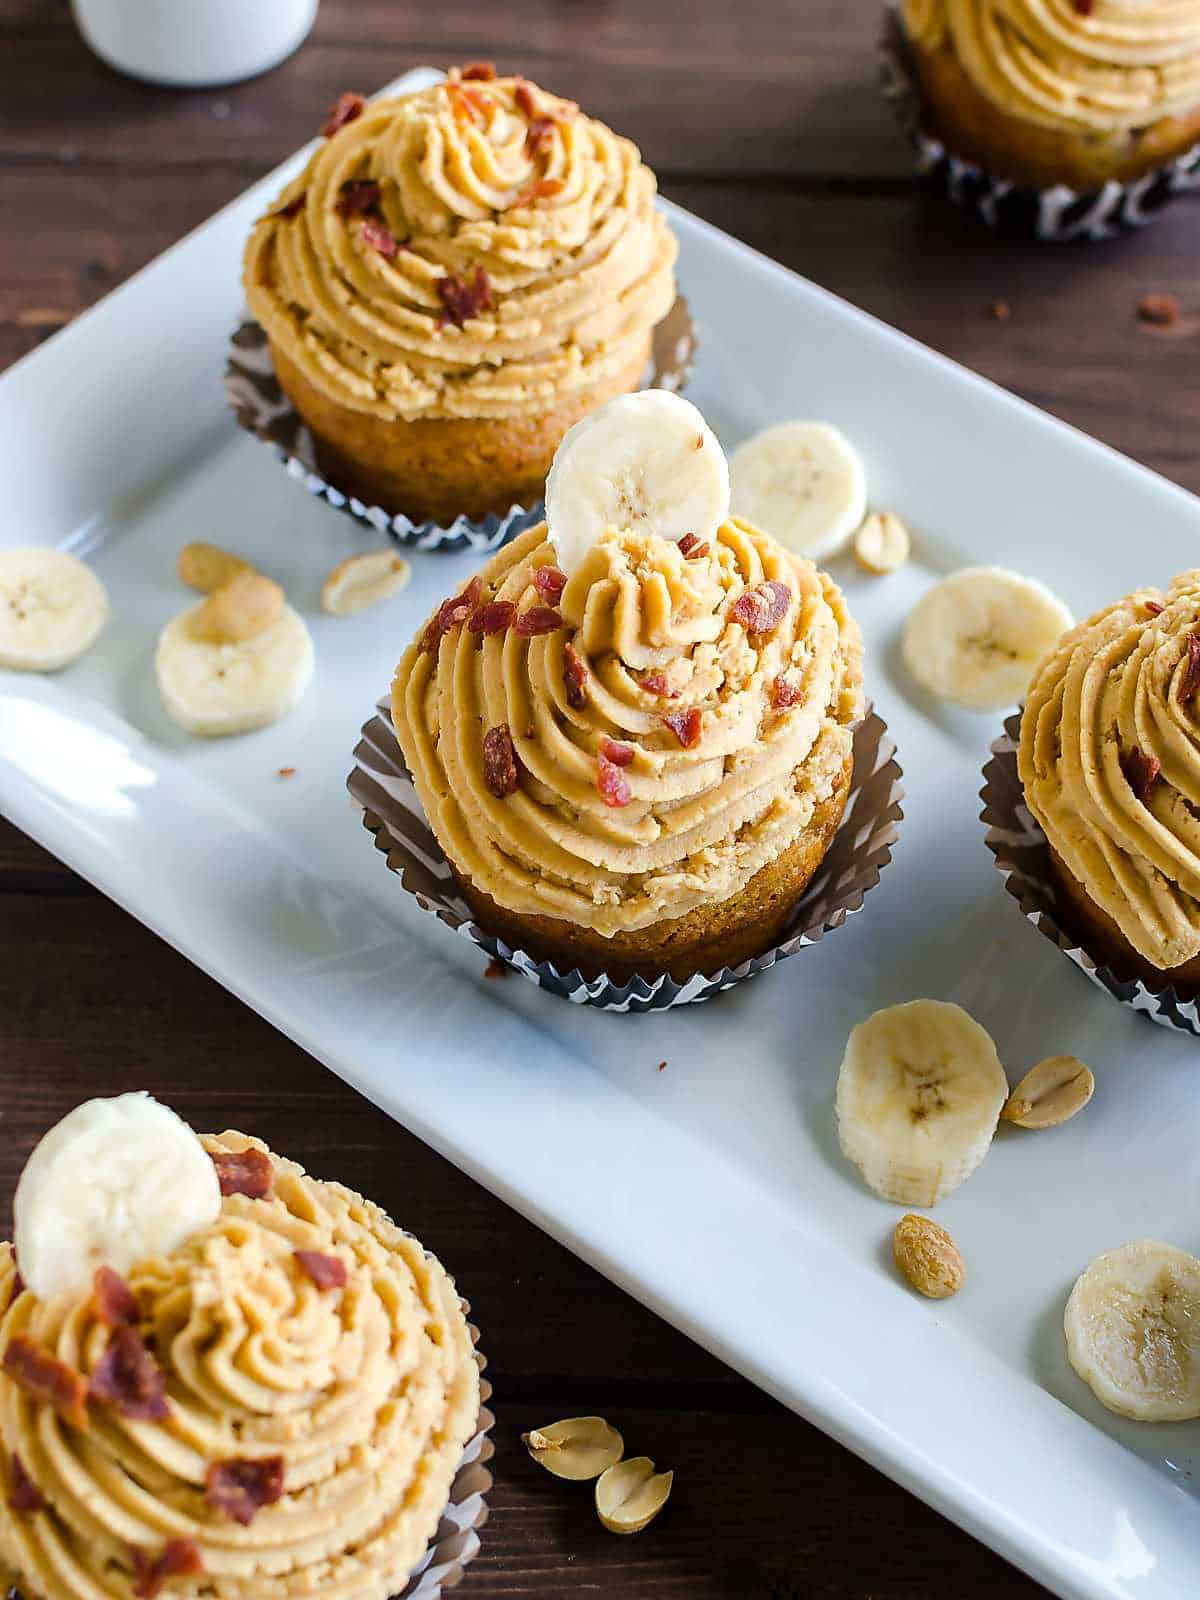 banana cupcake peanut butter frosting and bacon crumbles on a platter.